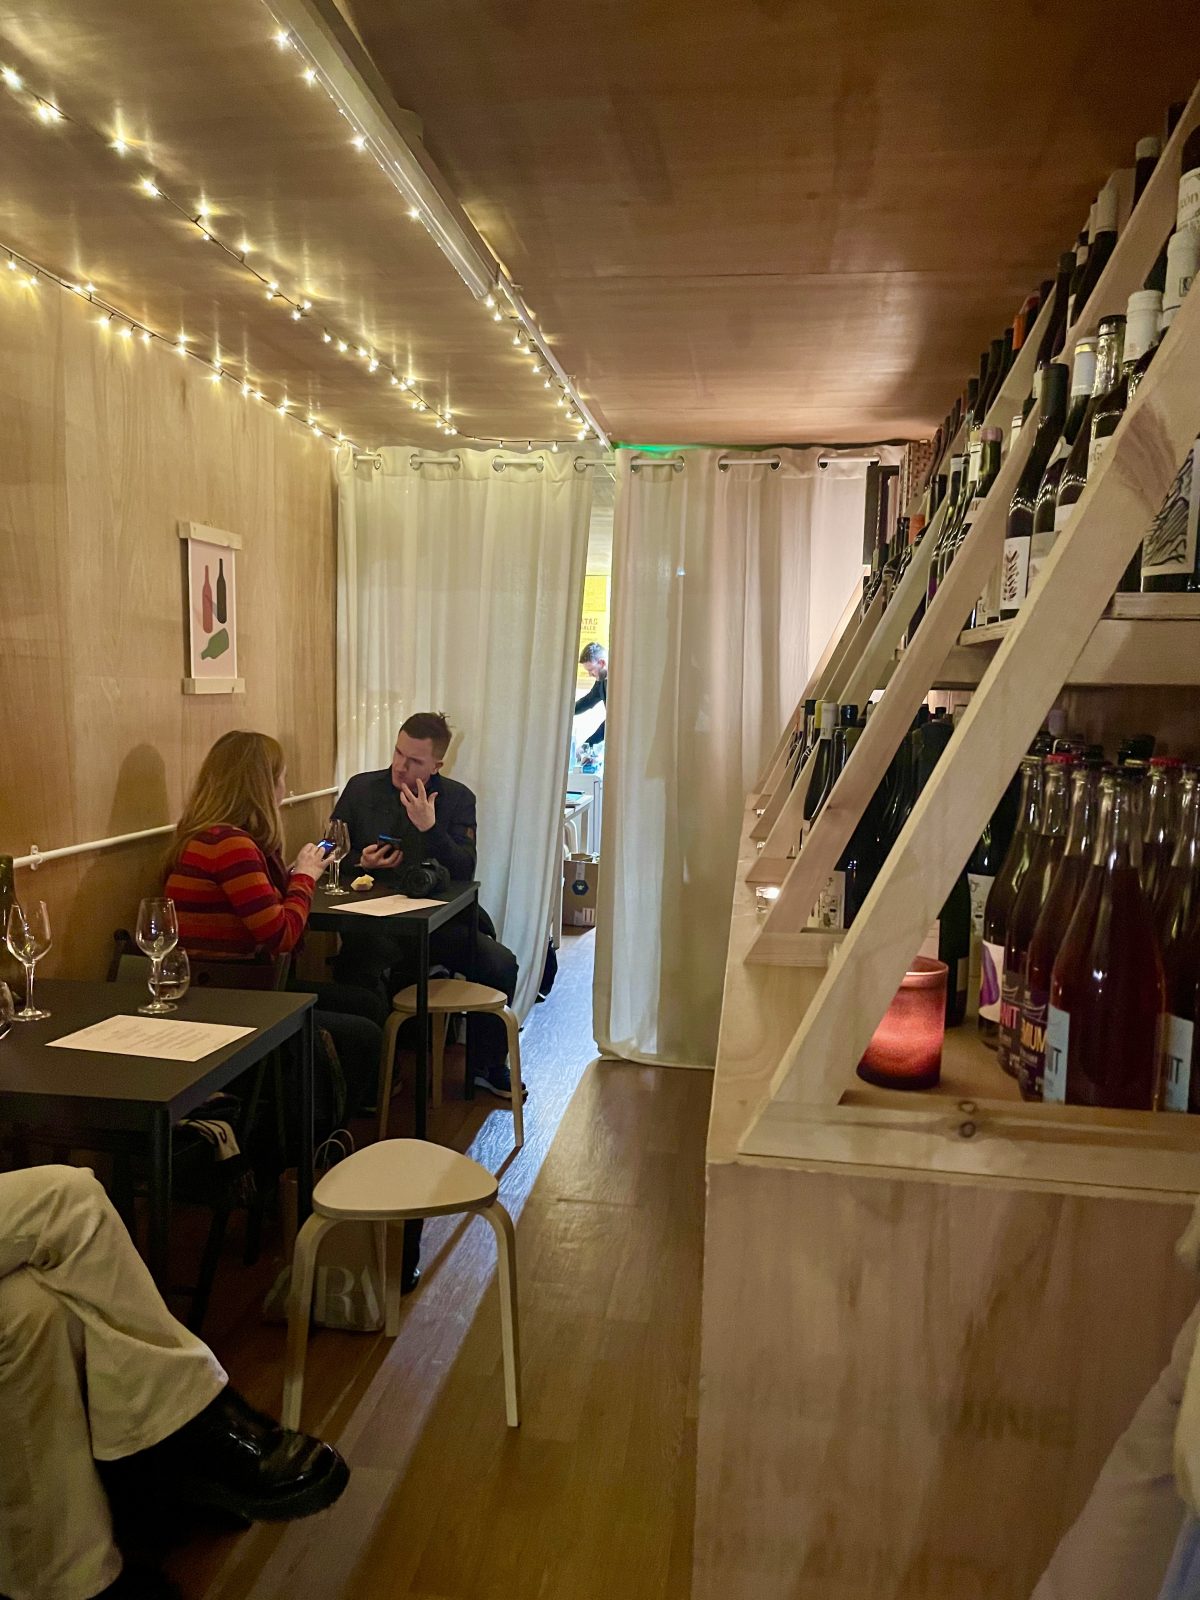 Manchester&#8217;s tiniest wine bar has opened inside a village of shipping containers, The Manc